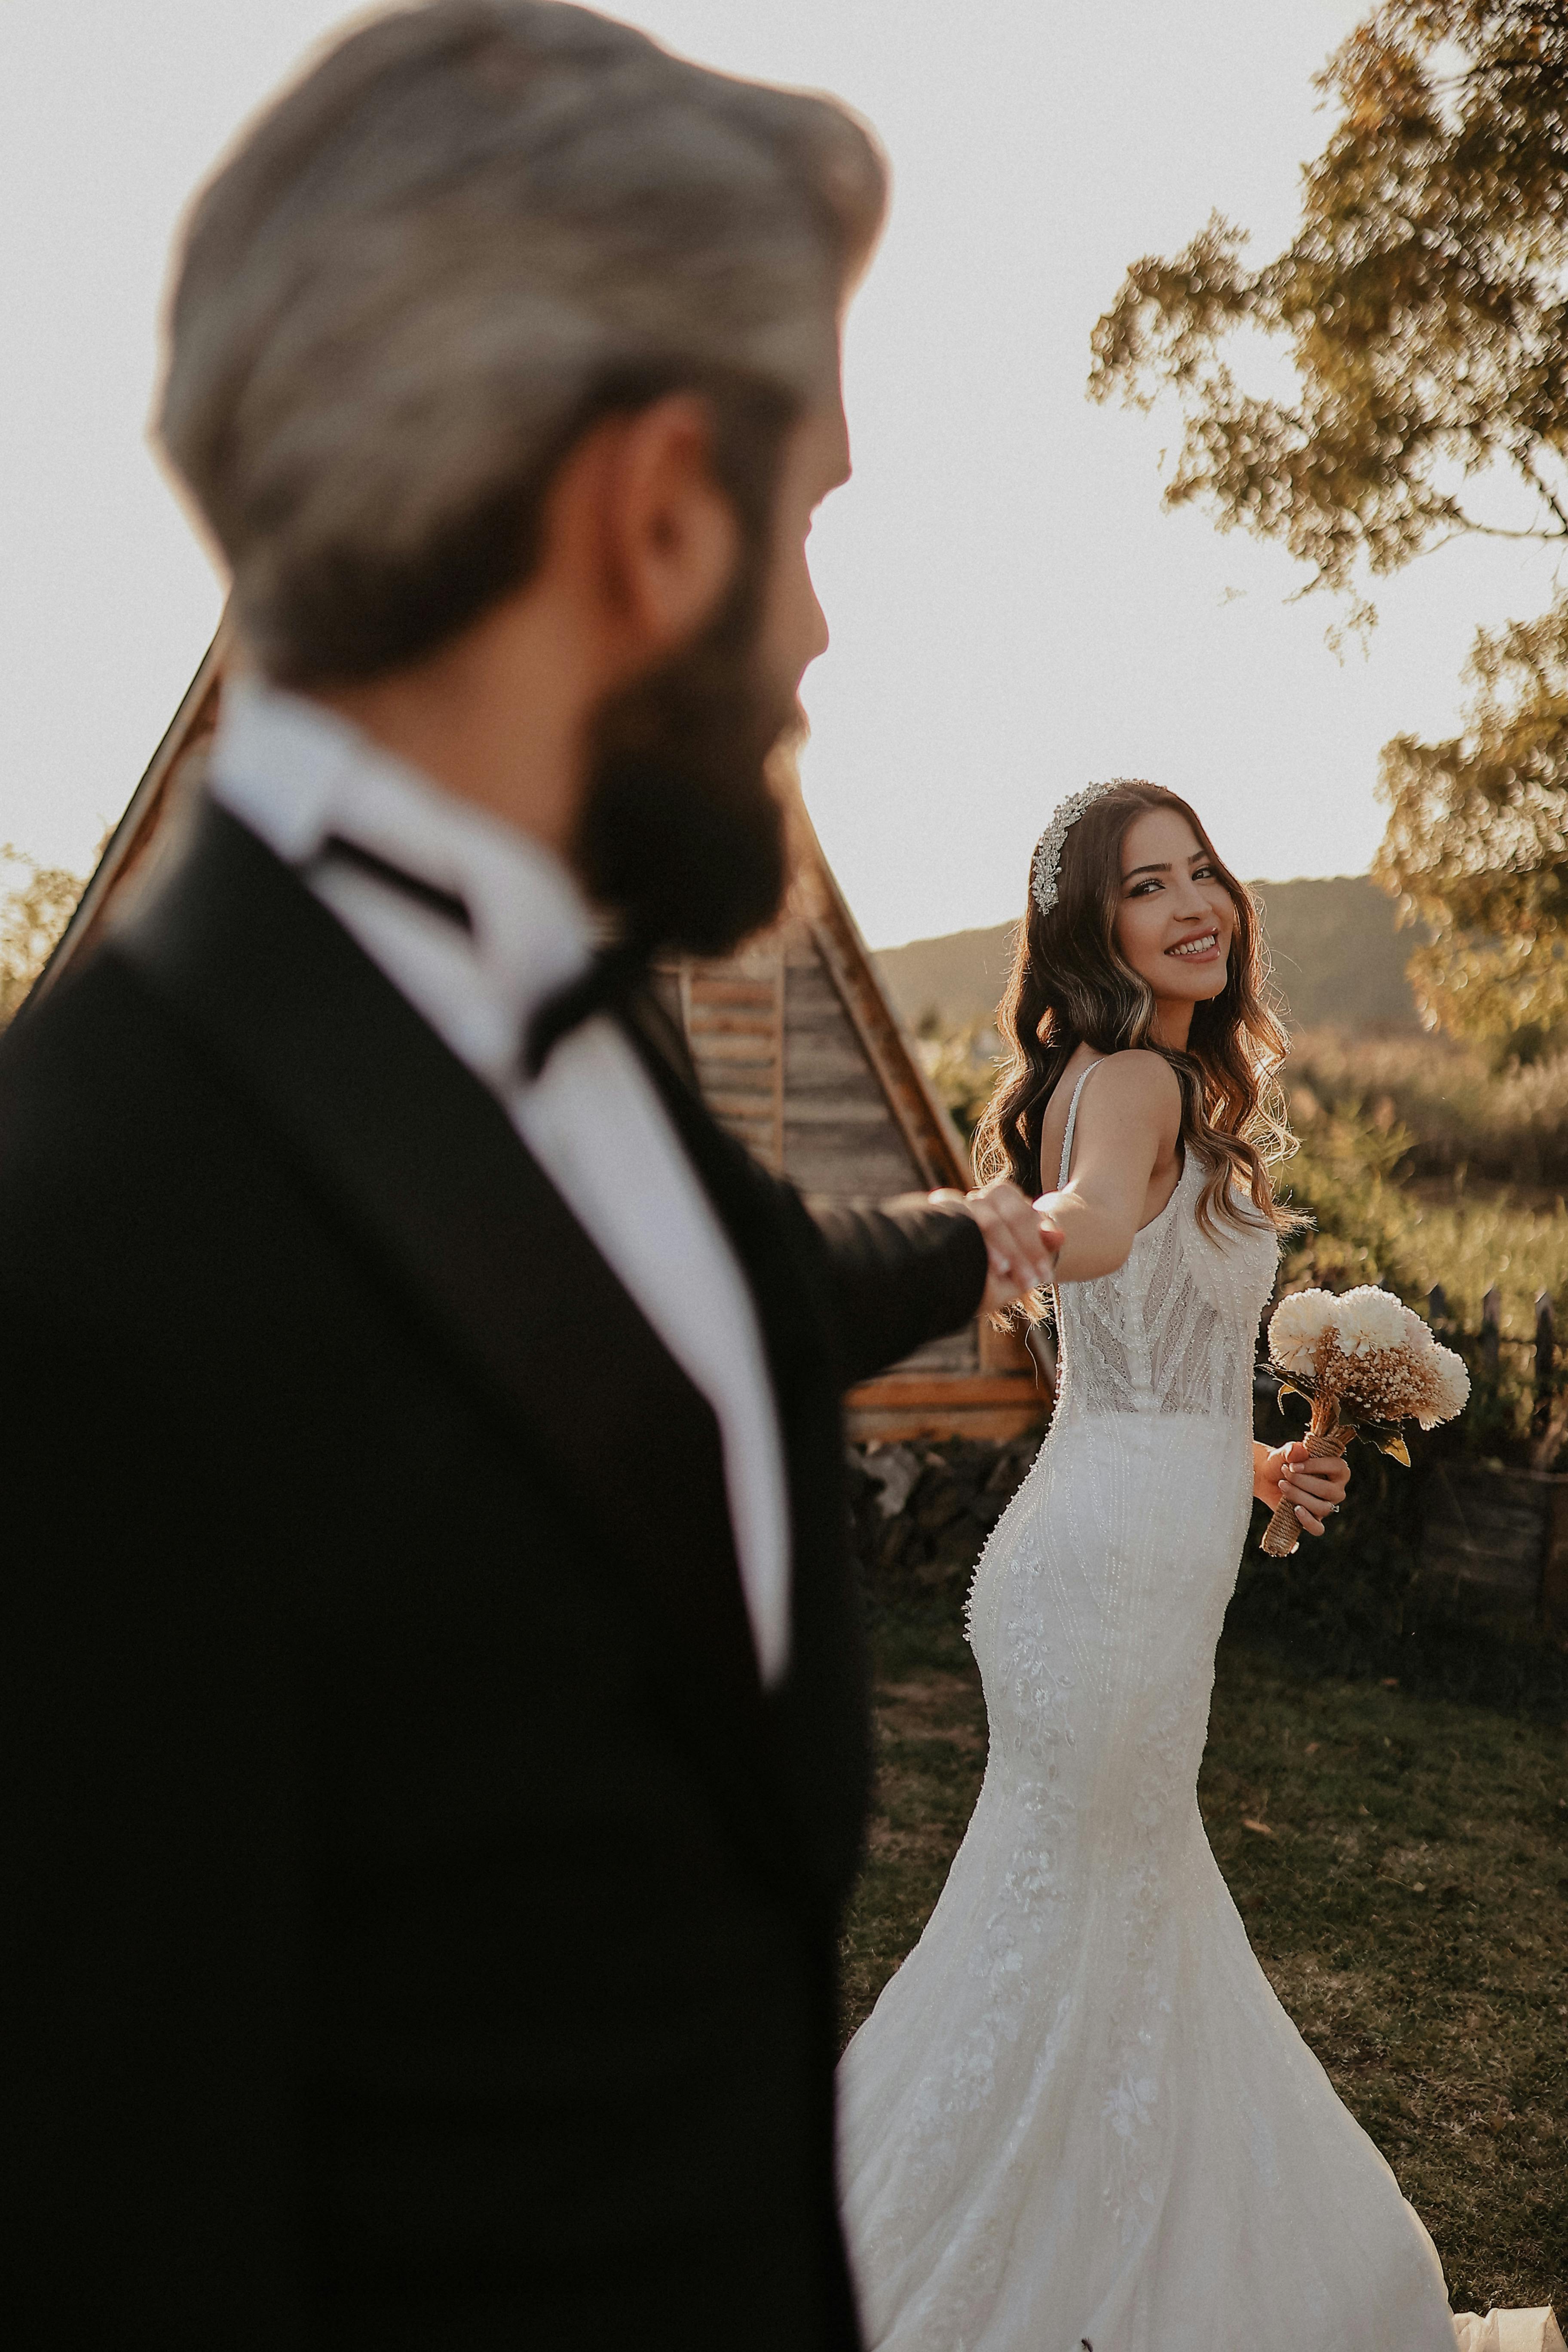 A bride and groom posing out at sunset | Source: Pexels